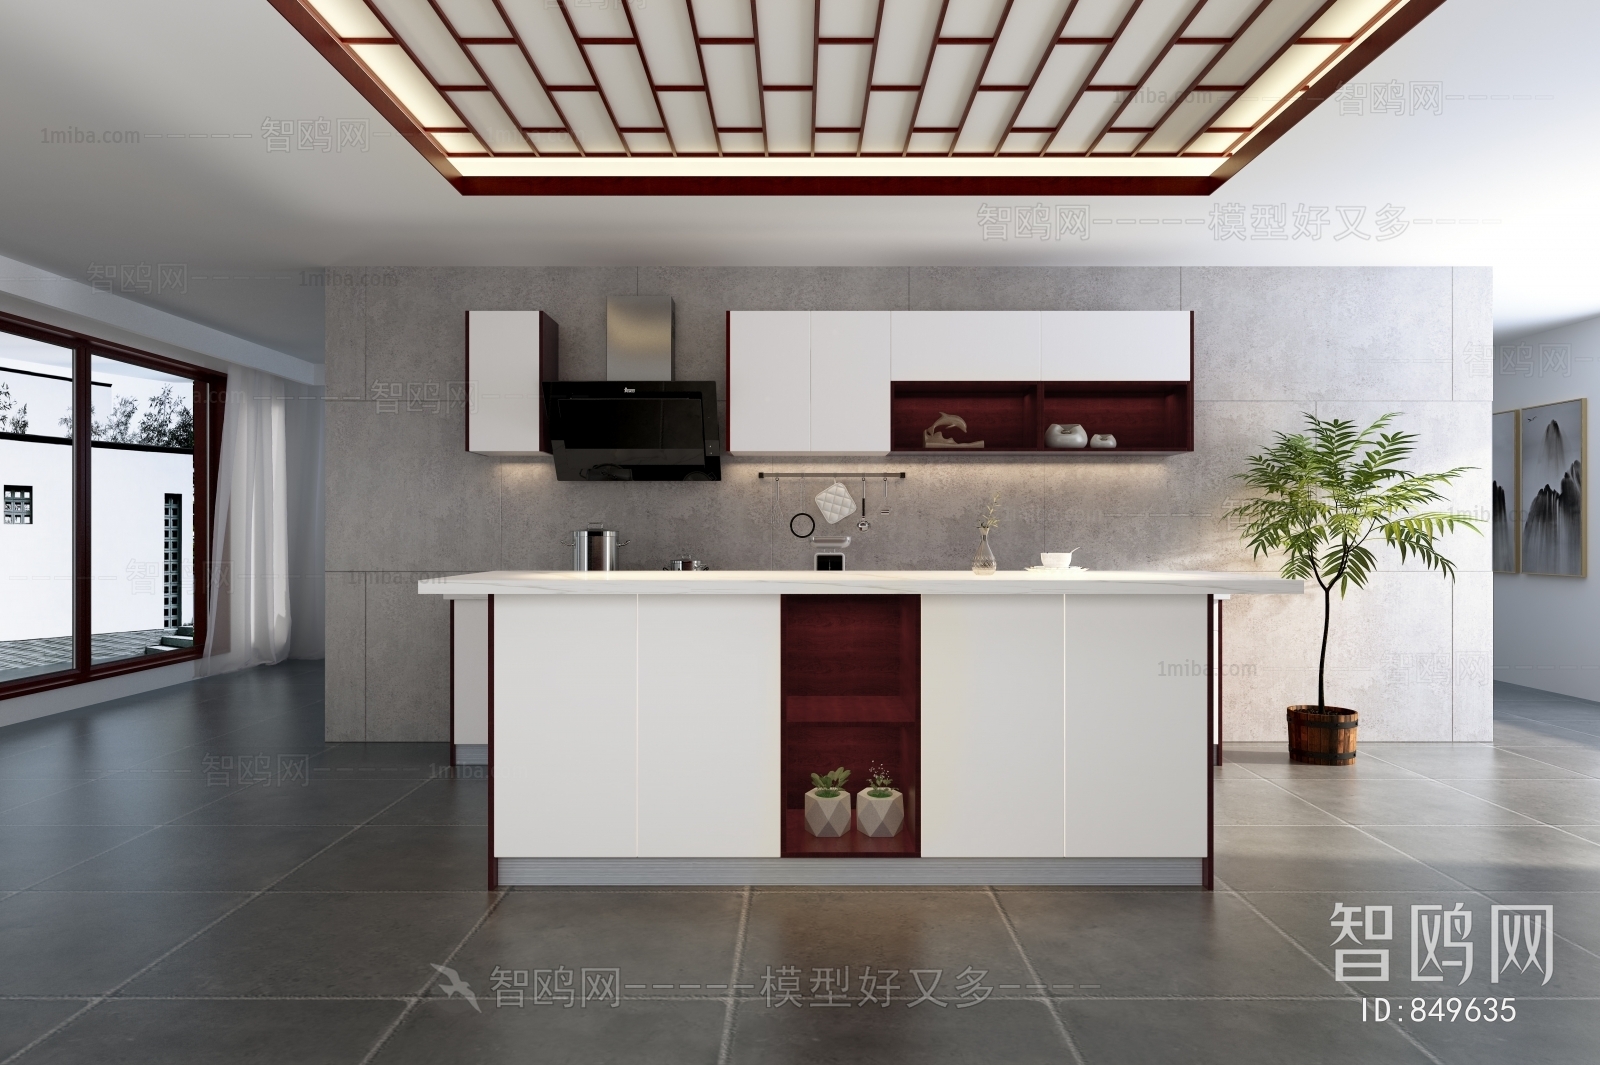 New Chinese Style Kitchen Cabinet